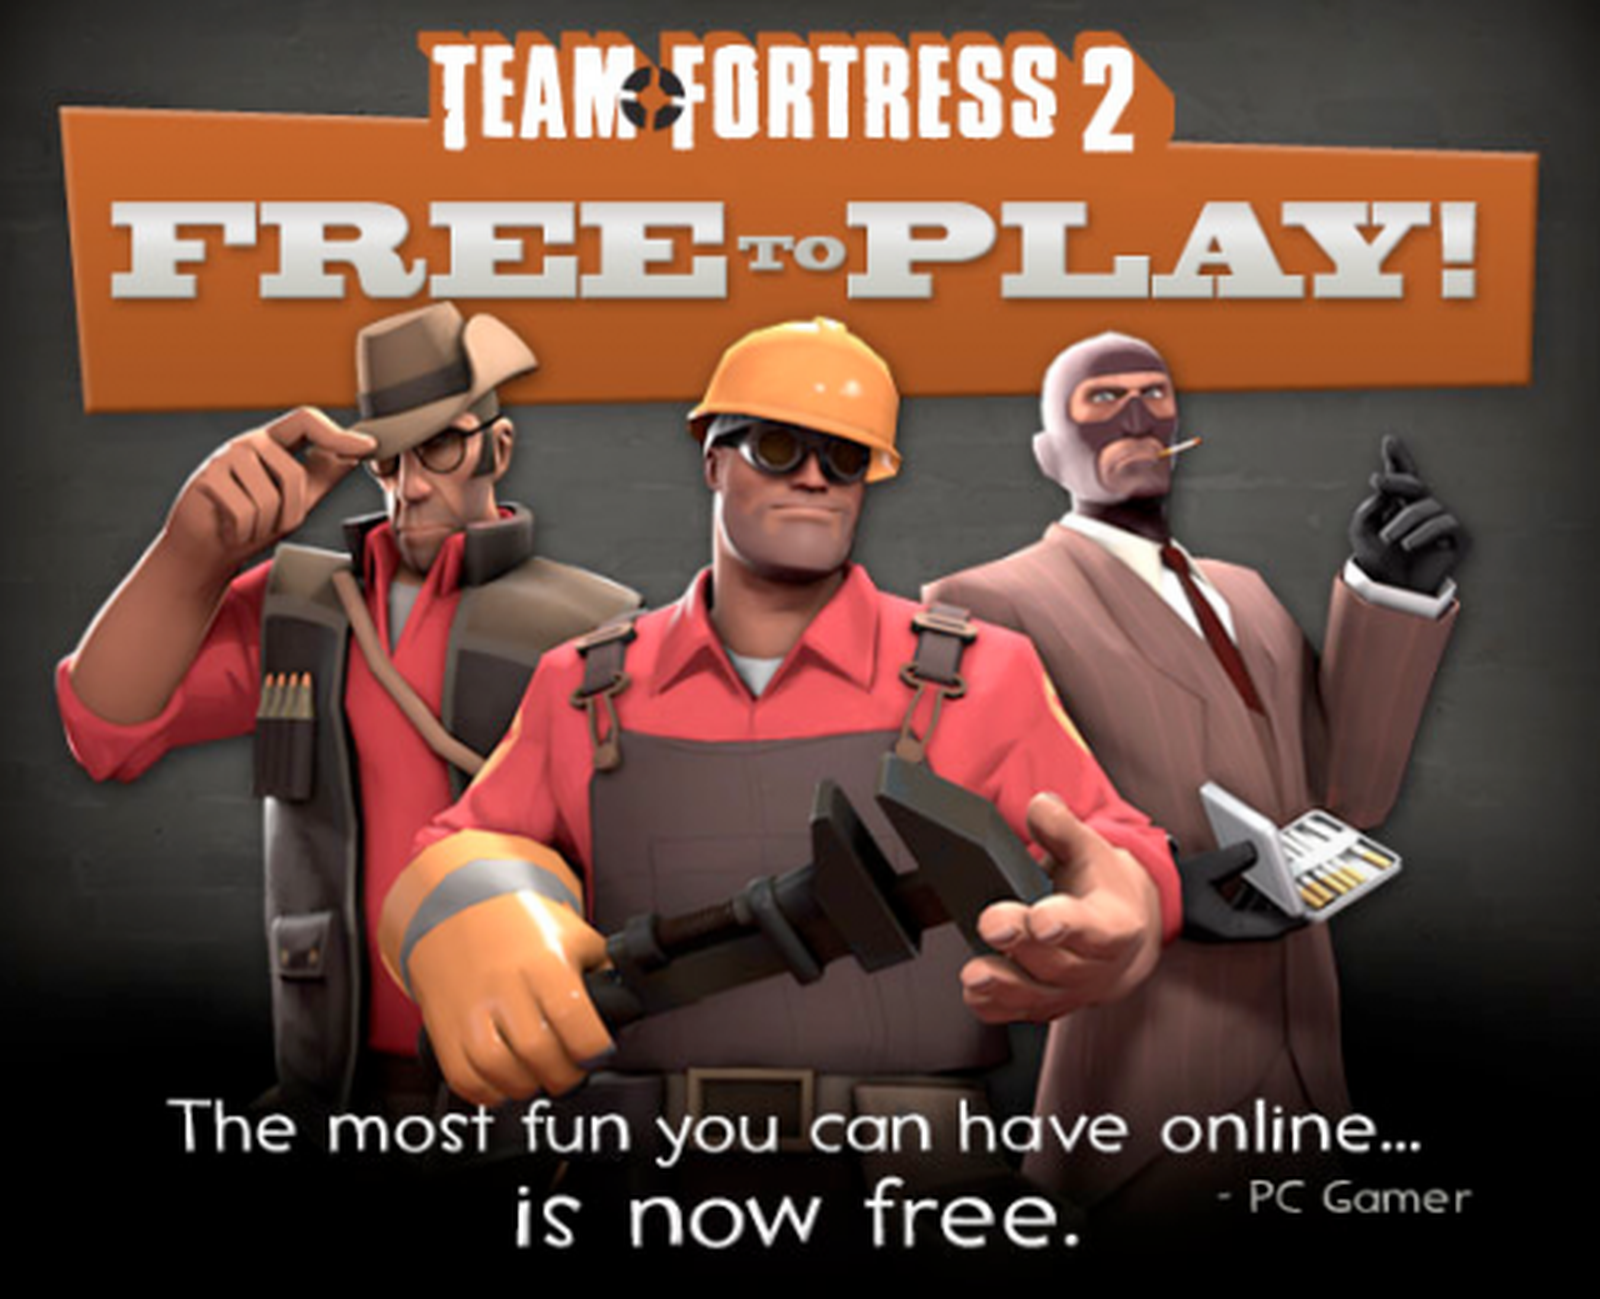 is team fortress 2 free on steam